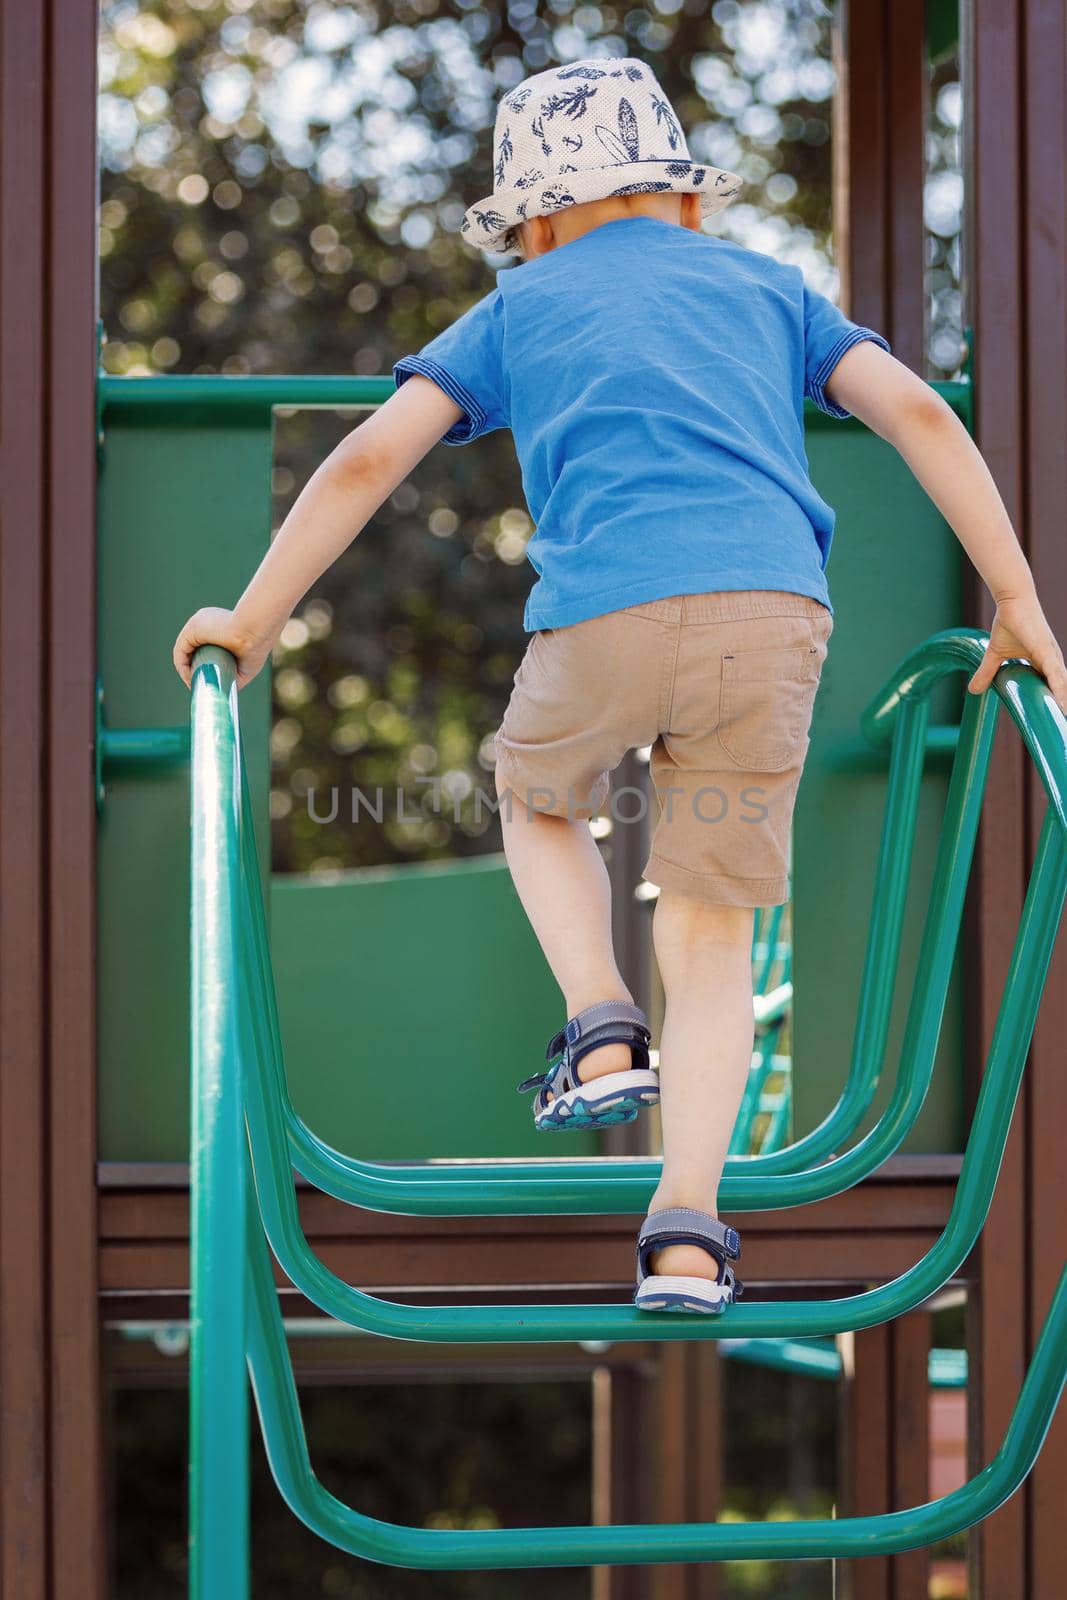 A little boy in a blue T-shirt boldly climbs the playground with a tubular green ladder, the child is not afraid to take risks. by Lincikas